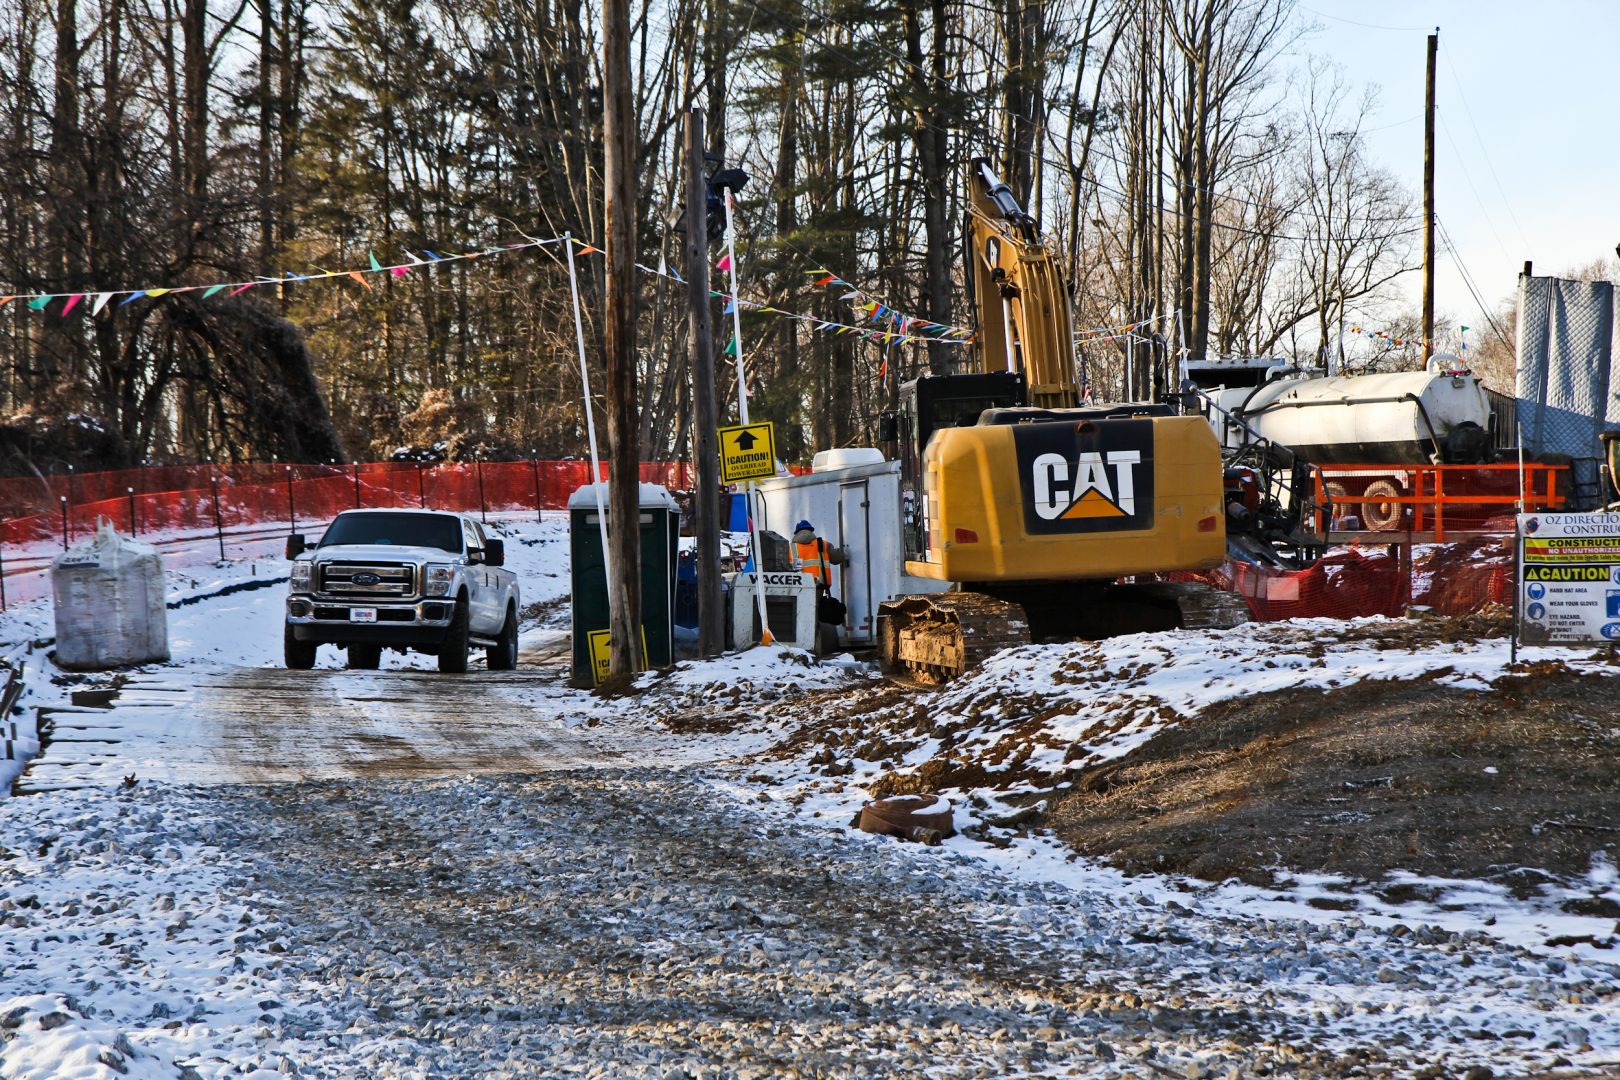 Mariner East 2 construction site in Edgemont Township, Delaware County. DEP said Sunoco can resume drilling at a site in neighboring Chester County where some private well water turned cloudy after the company punctured an aquifer last summer.